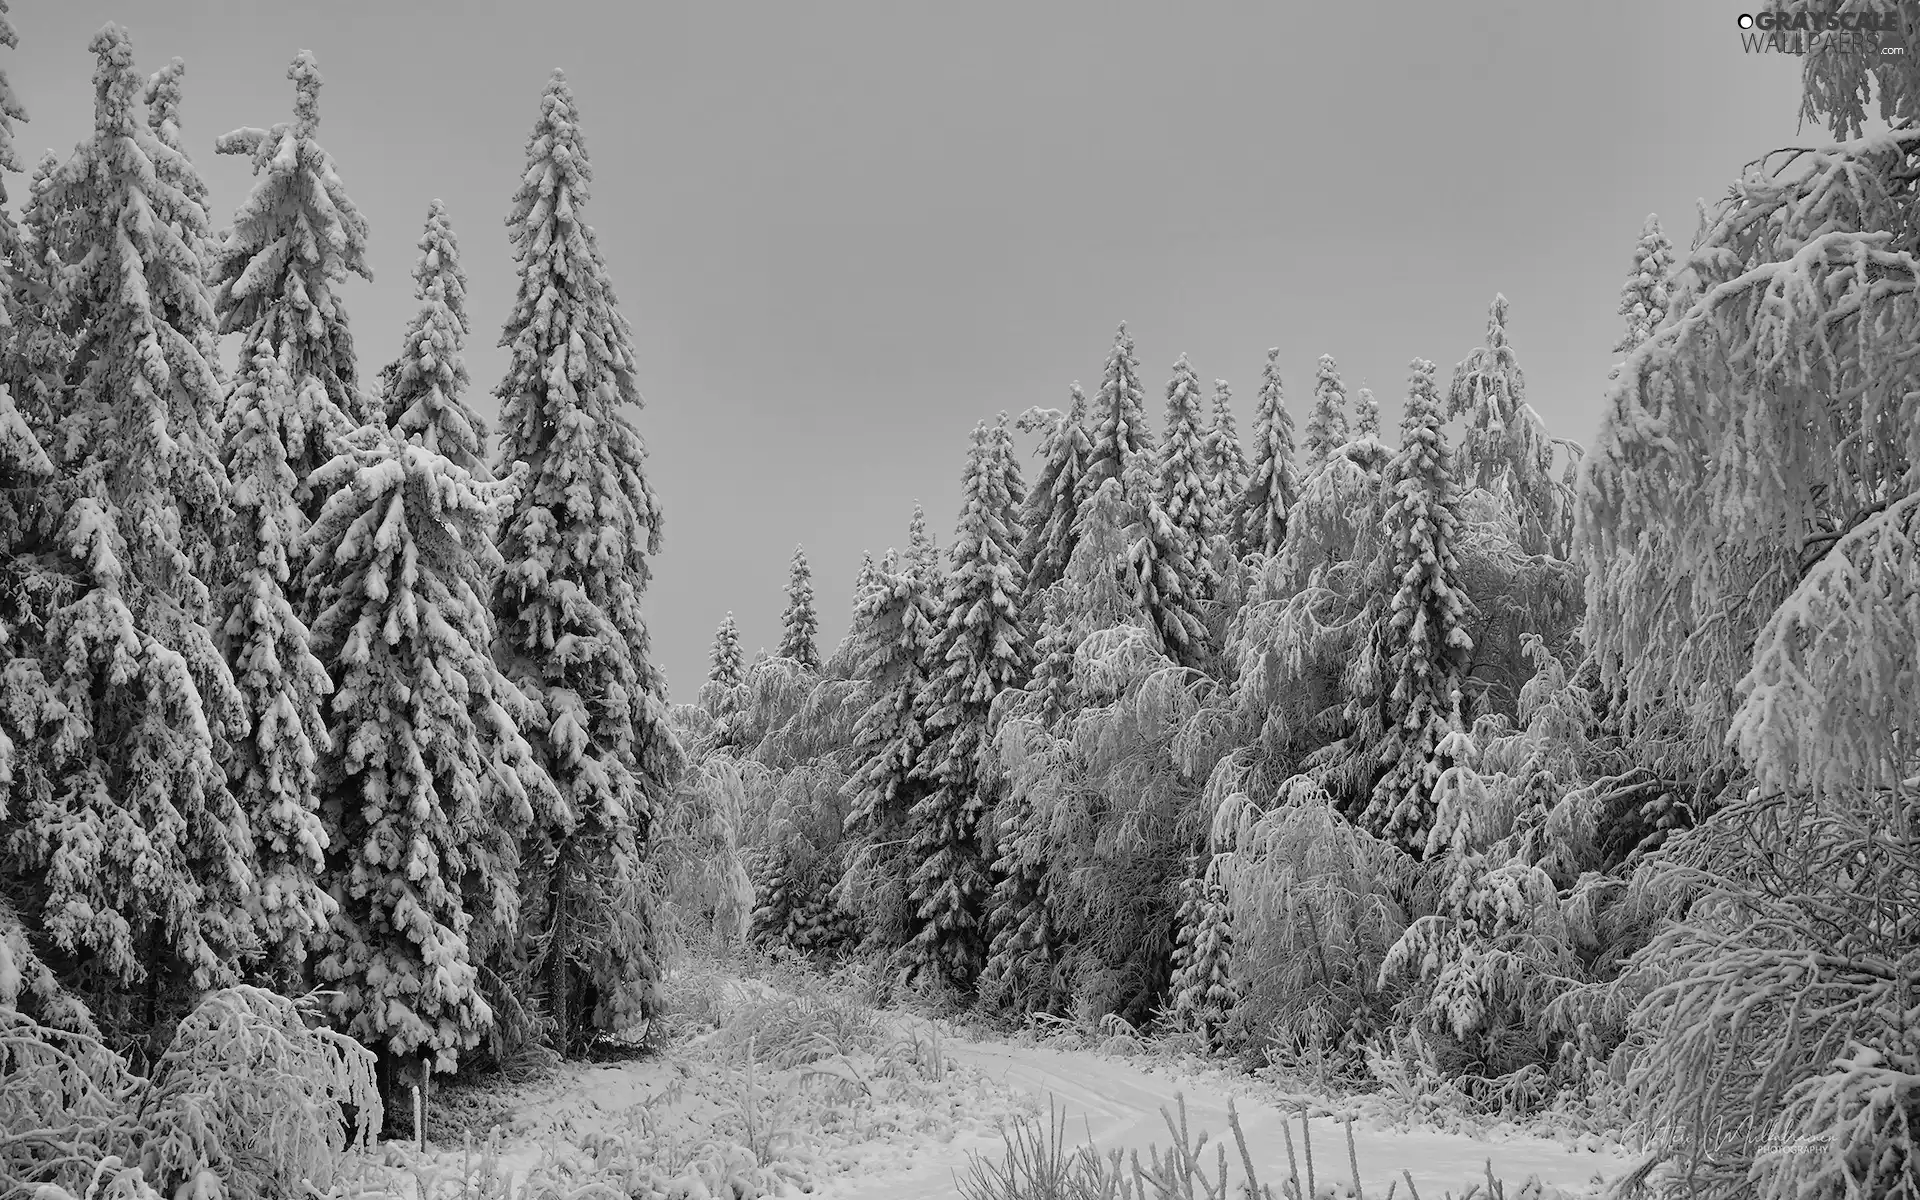 Conifers, forest, snow, Snowy, winter